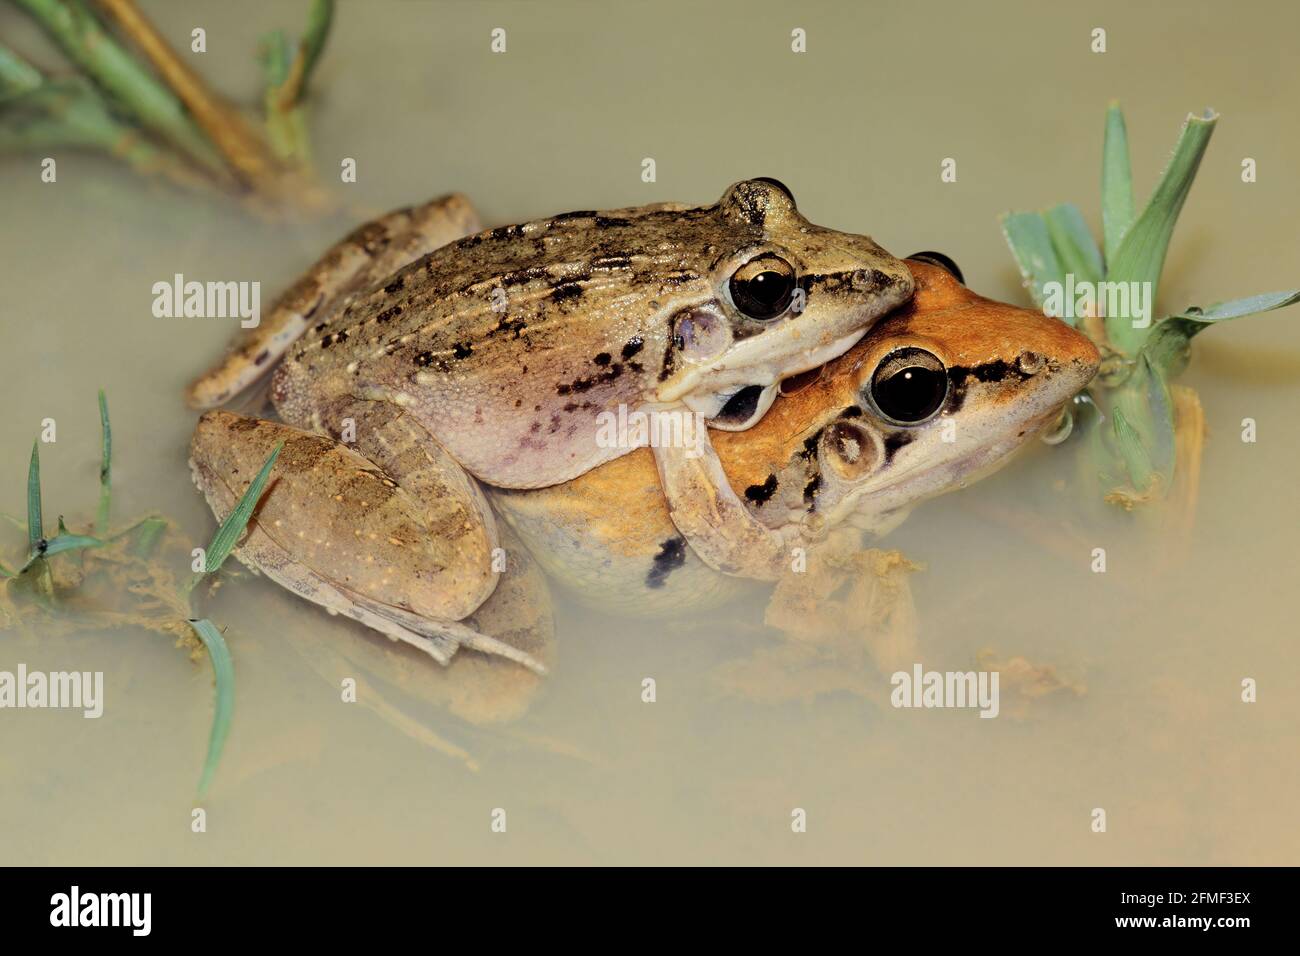 A pair of plain grass frogs (Ptychadena anchietae) mating in shallow water, South Africa Stock Photo